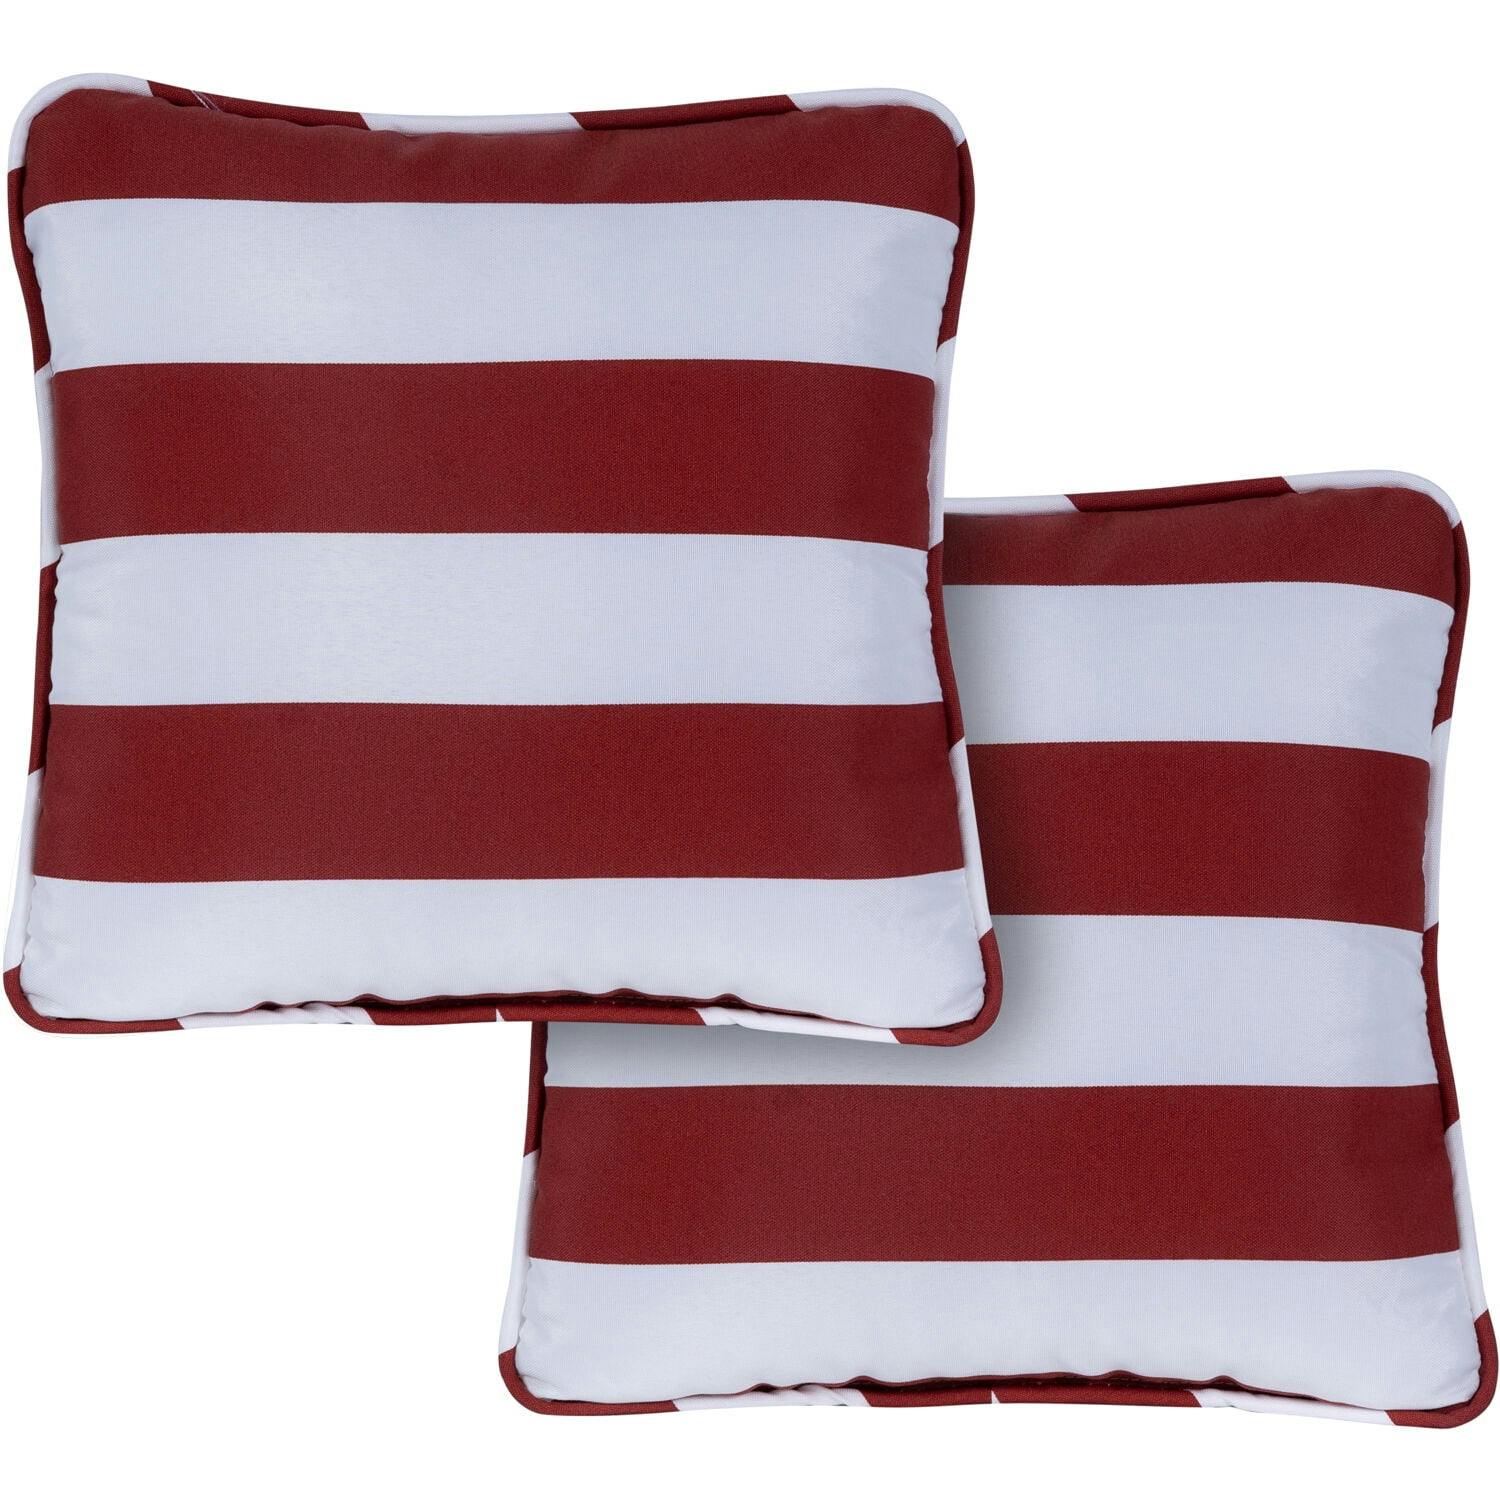 Red and White Striped Square Indoor/Outdoor Throw Pillow Set